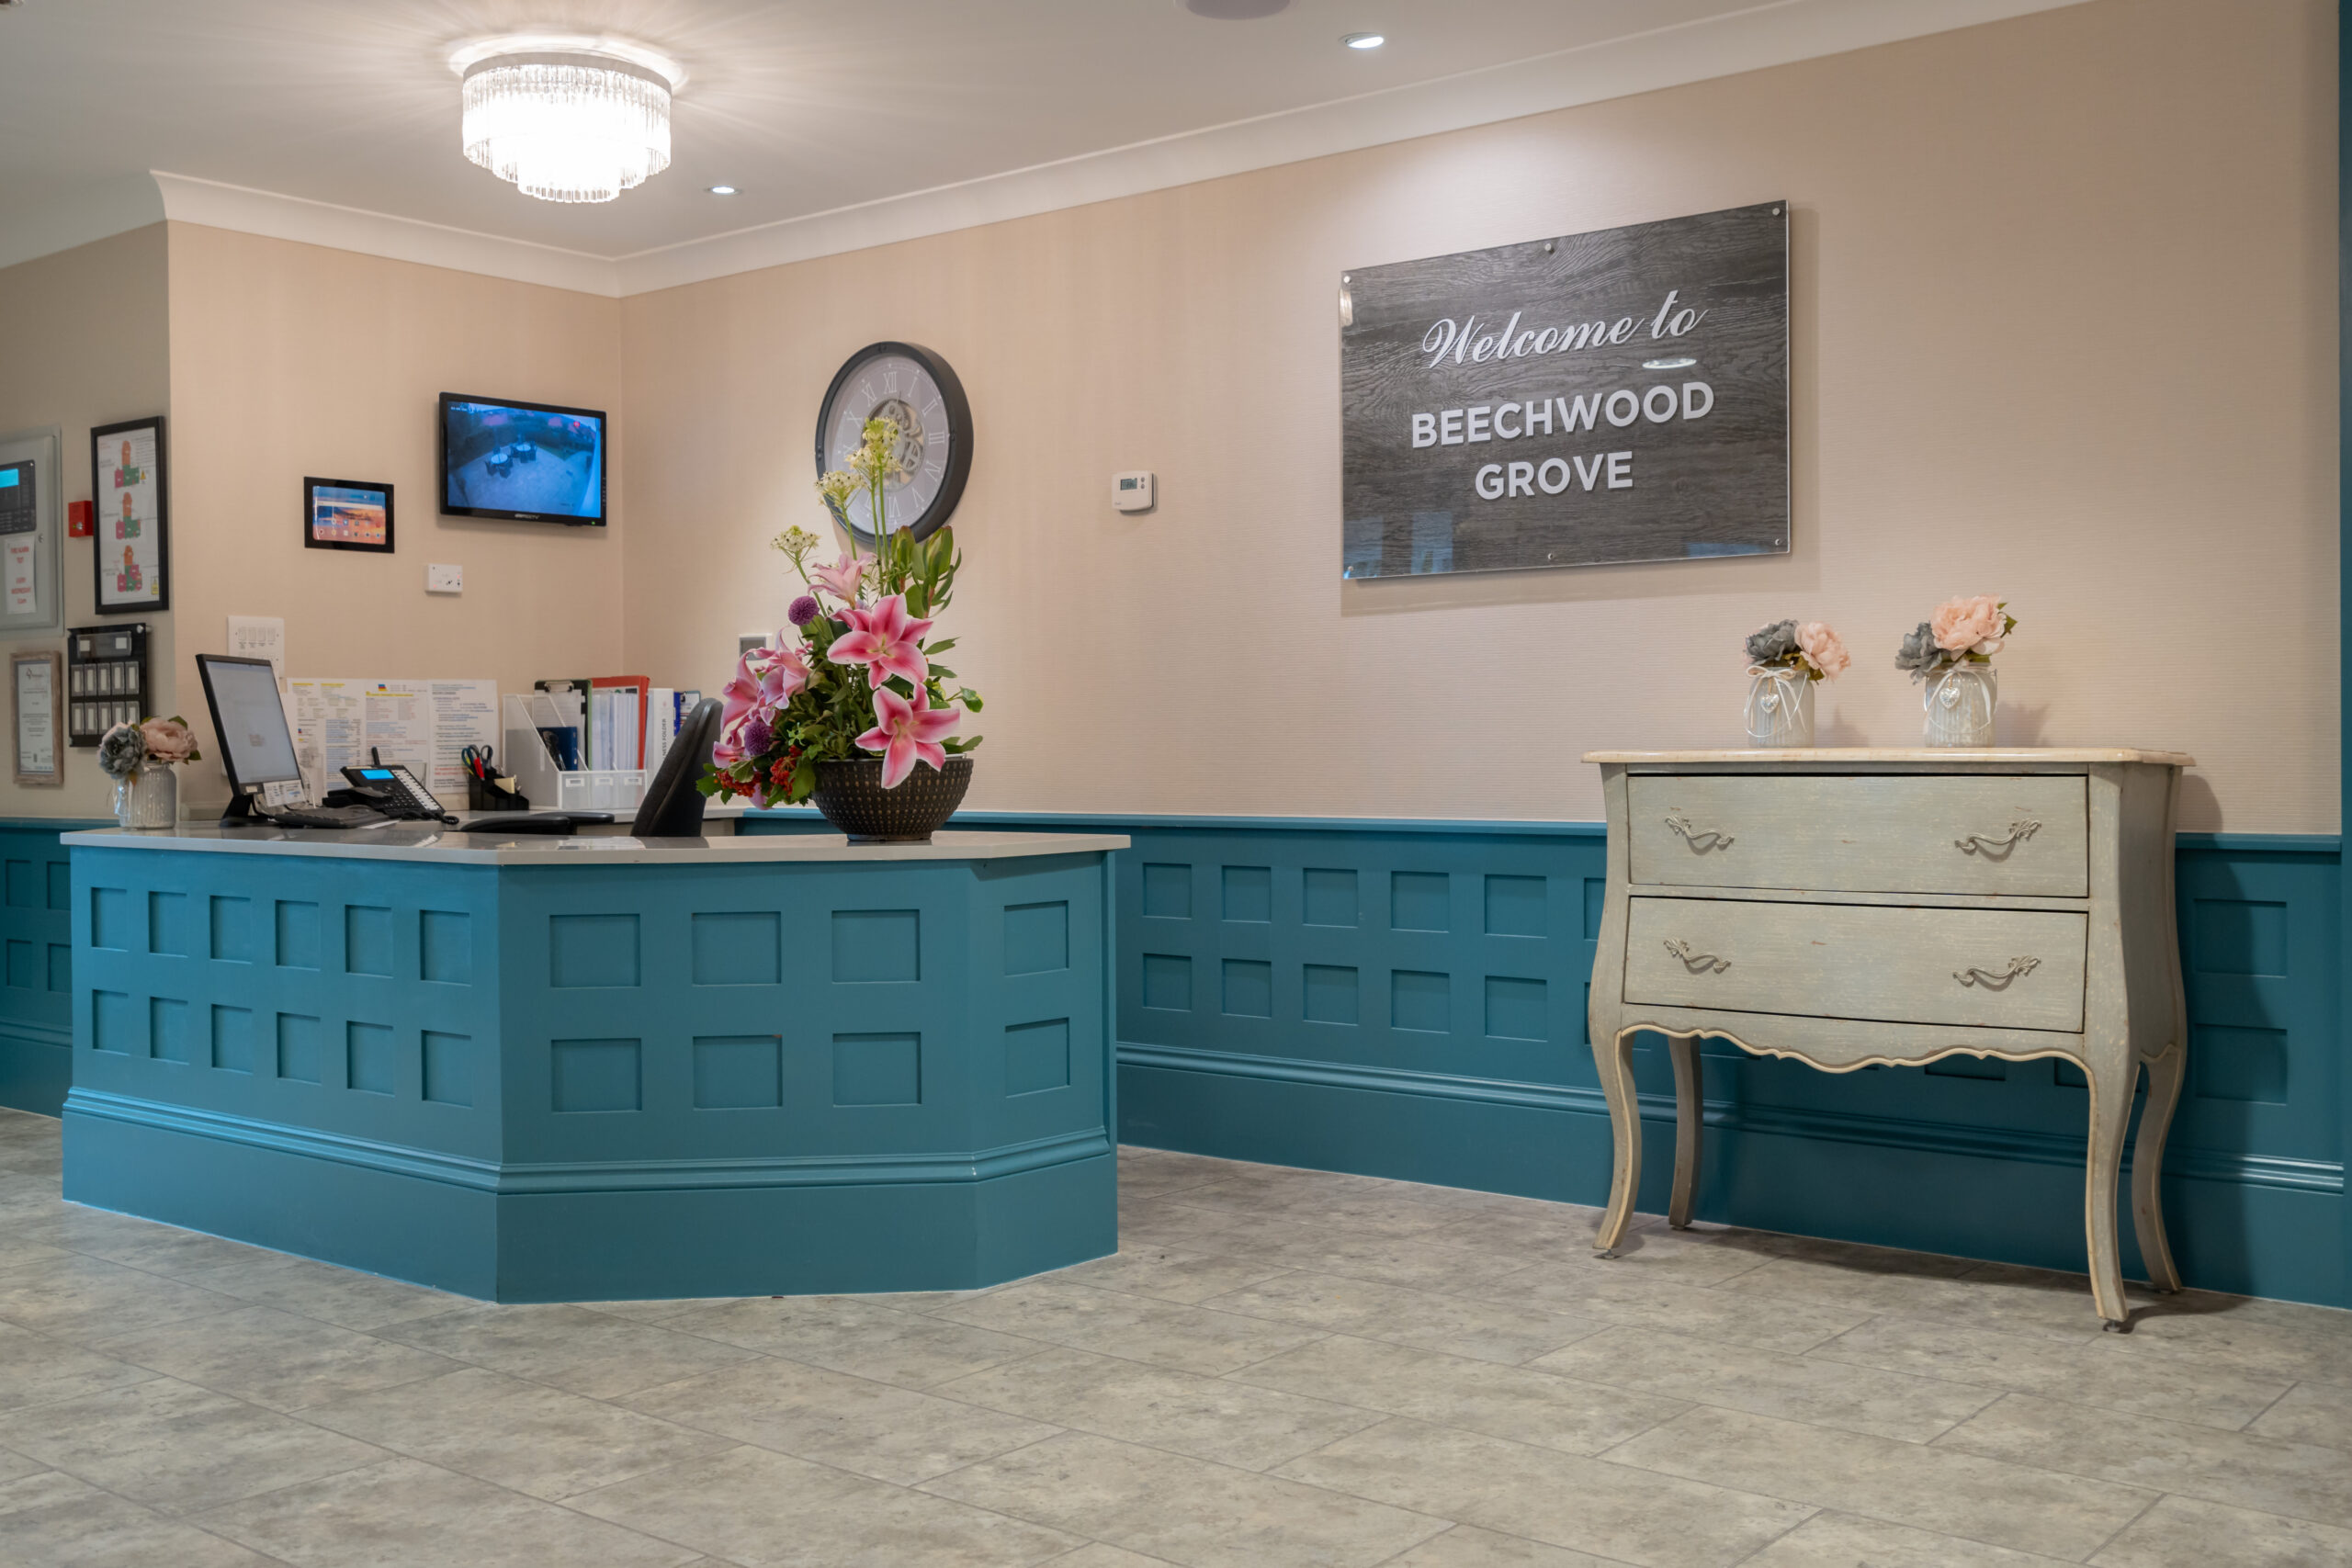 Beechwood Grove Care Home reception area with welcome sign on wall